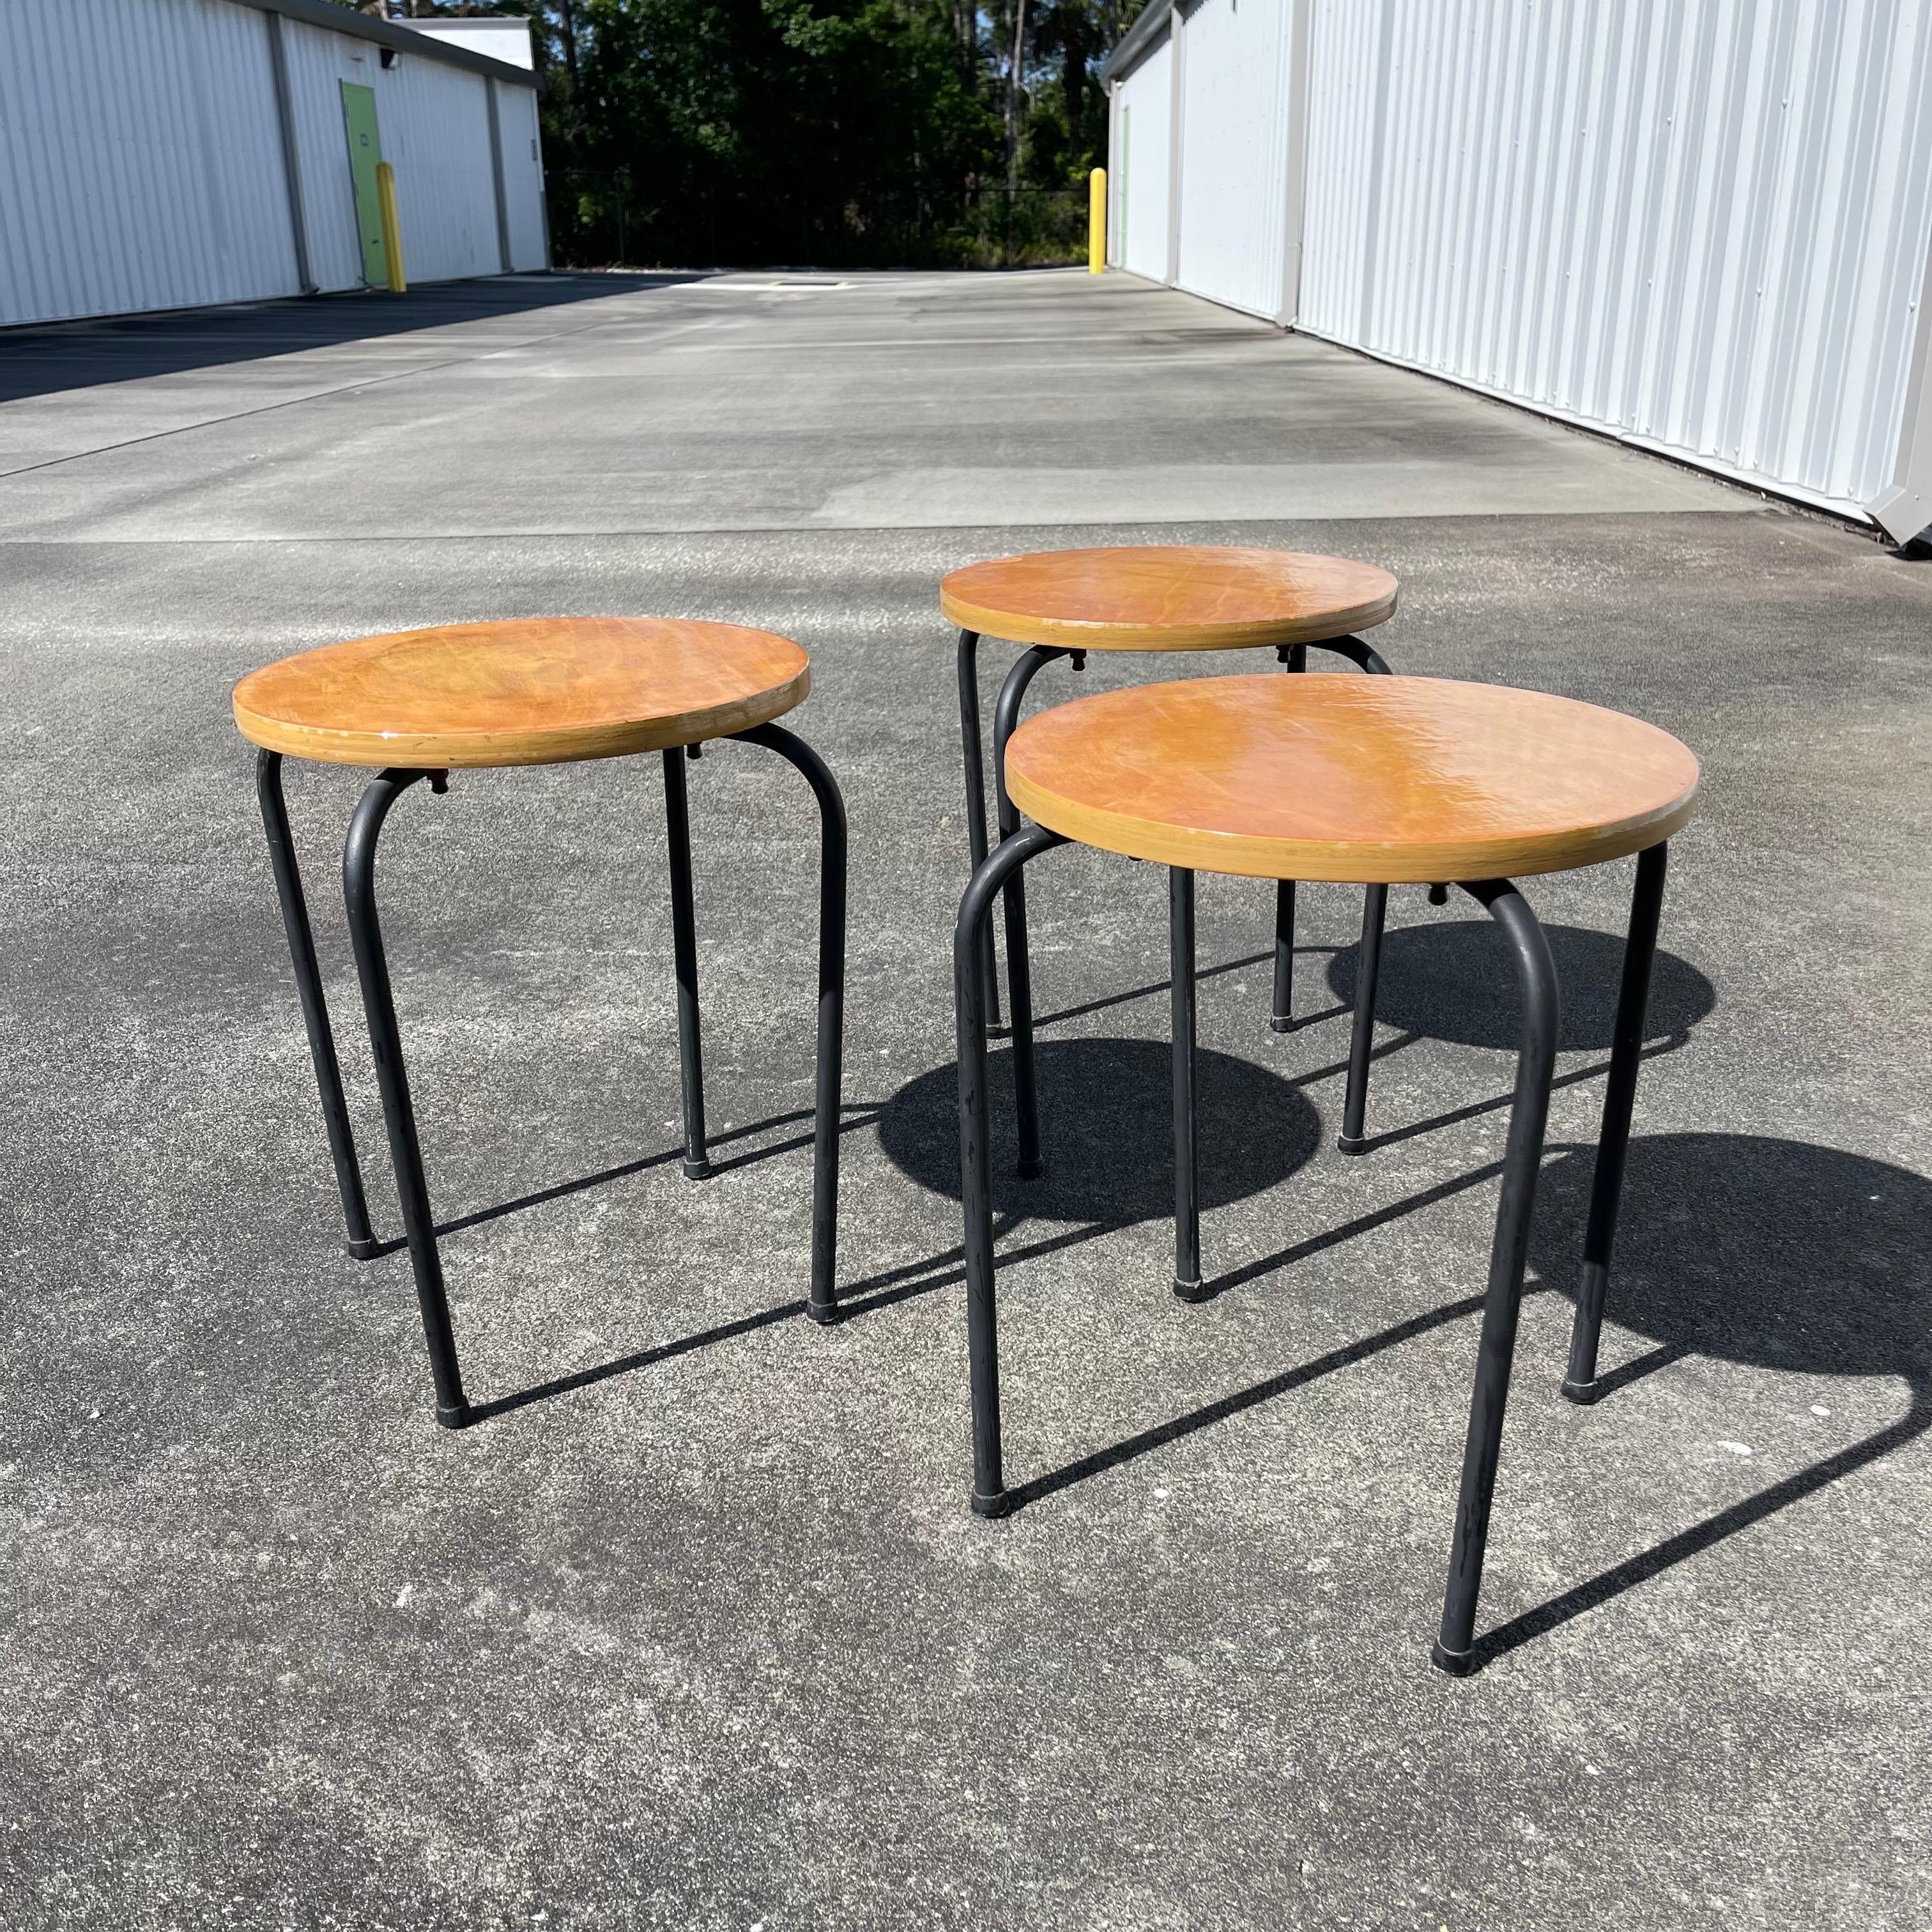 Set of 3 round wood with metal leg stacking tables or stools.